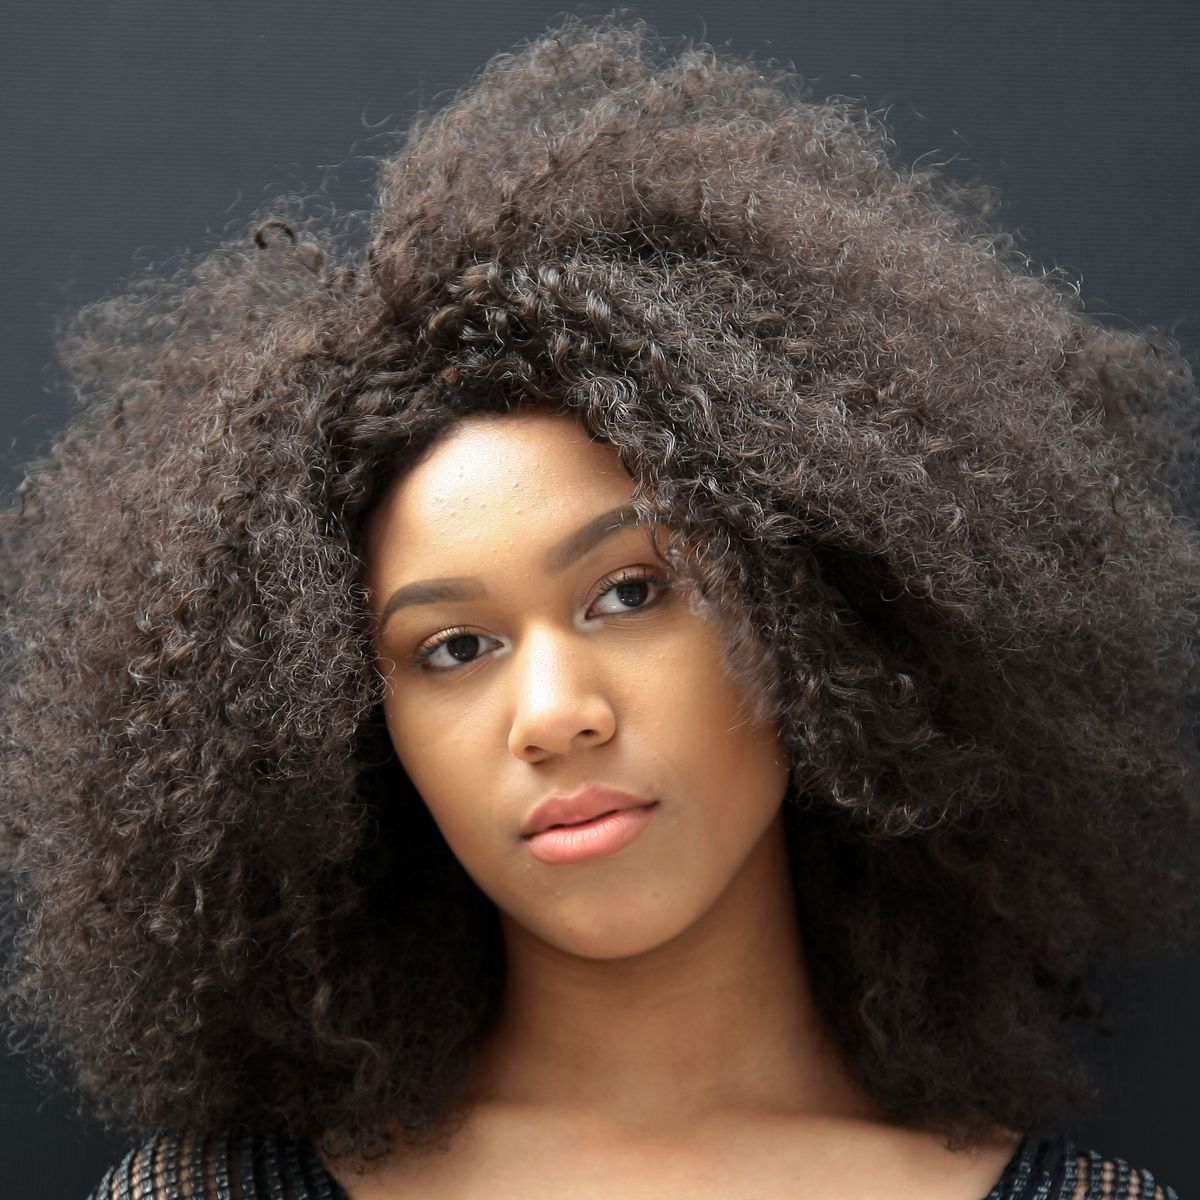 Afro hair care tips: how to take care of your natural hair